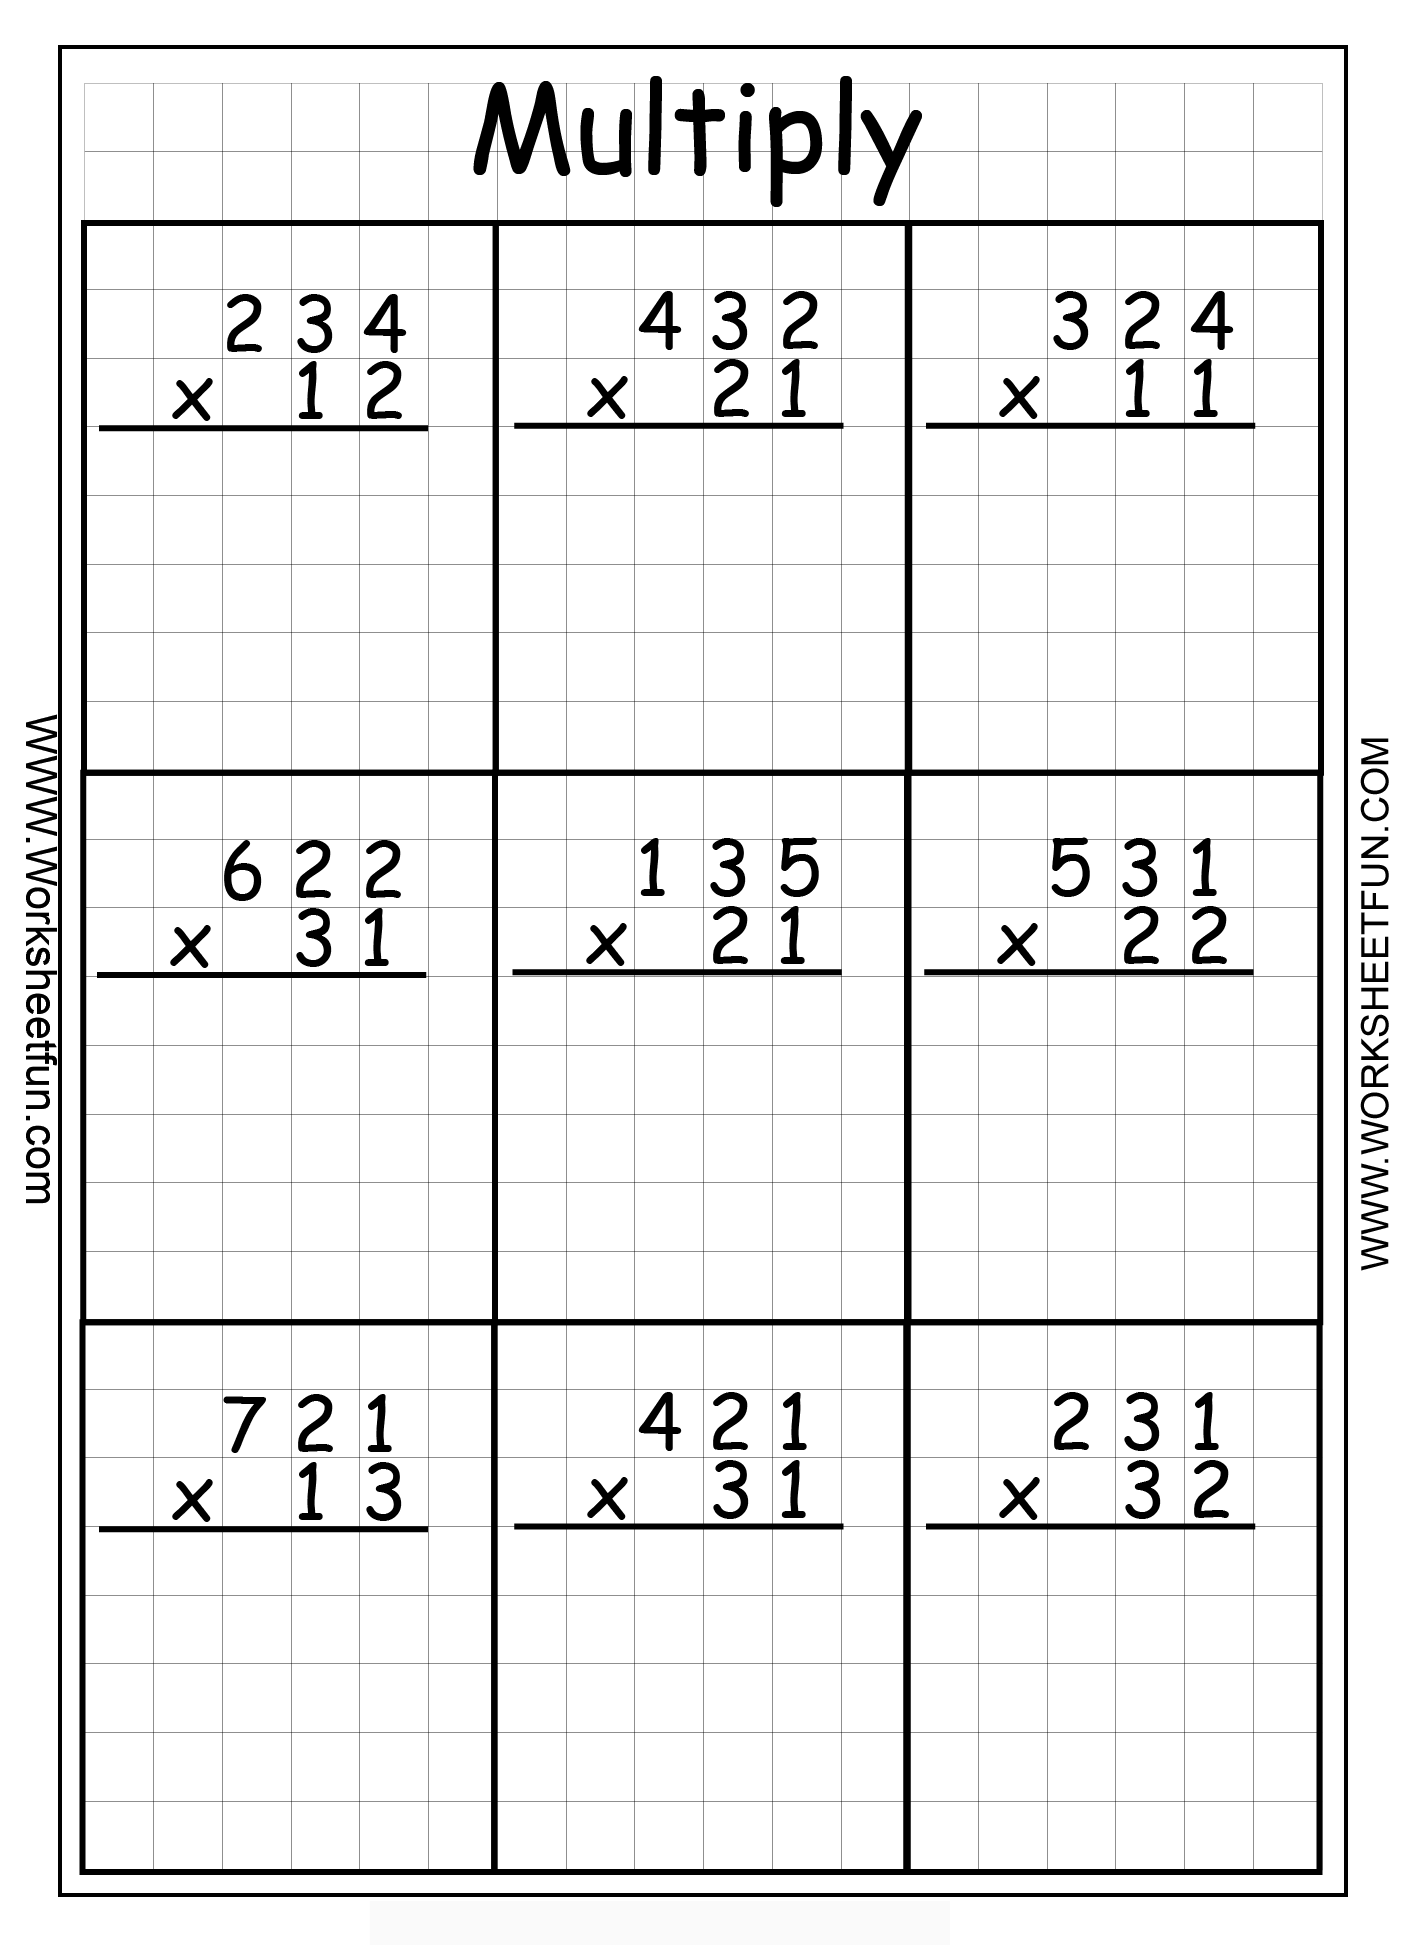 multiplying-4-digit-by-2-digit-numbers-large-print-with-space-separated-thousands-a